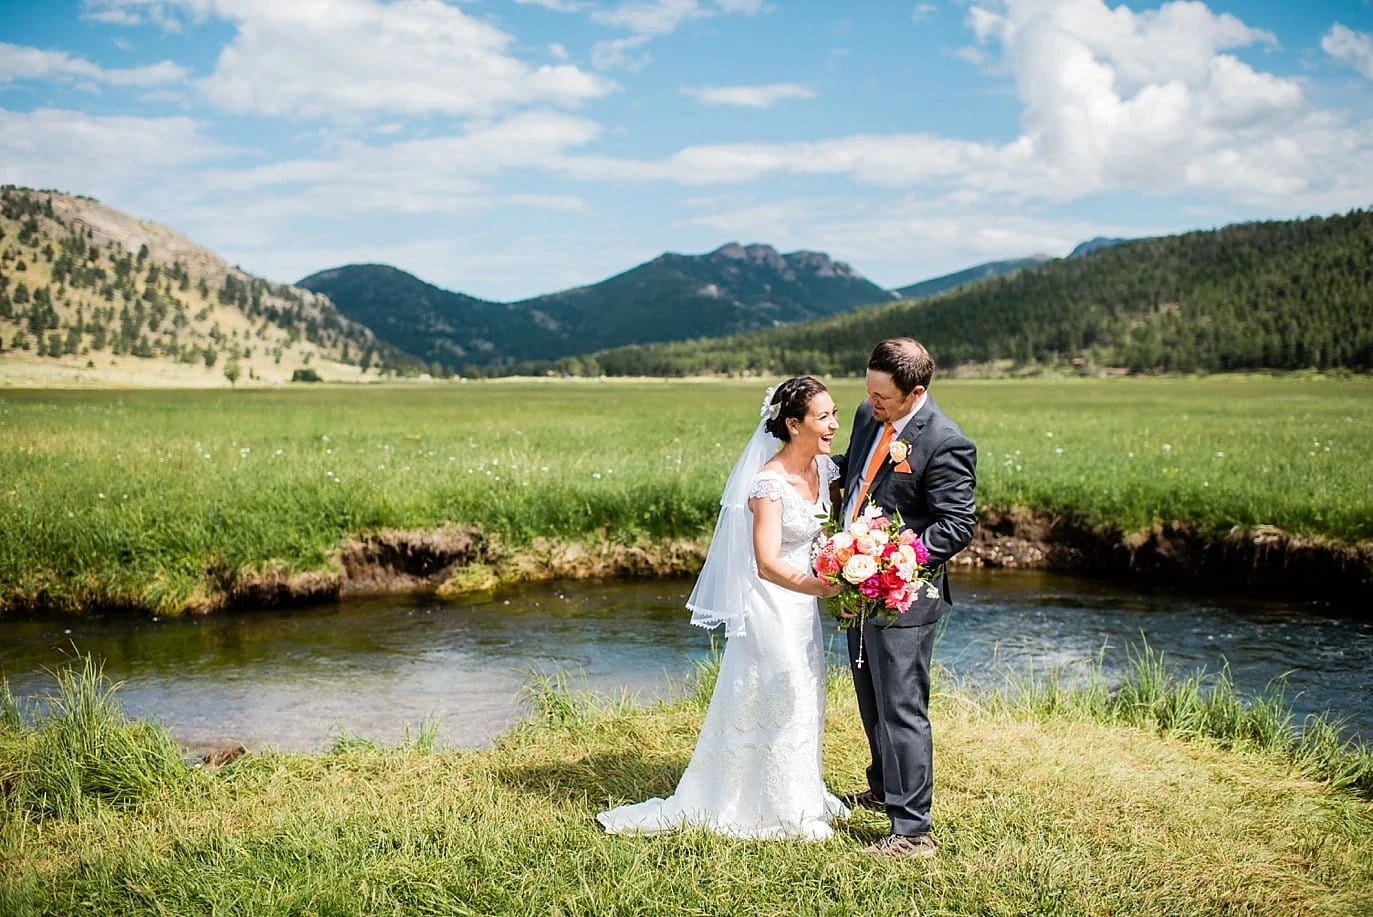 bride and groom by creek at Moraine Valley by Estes Park wedding photographer Jennie Crate